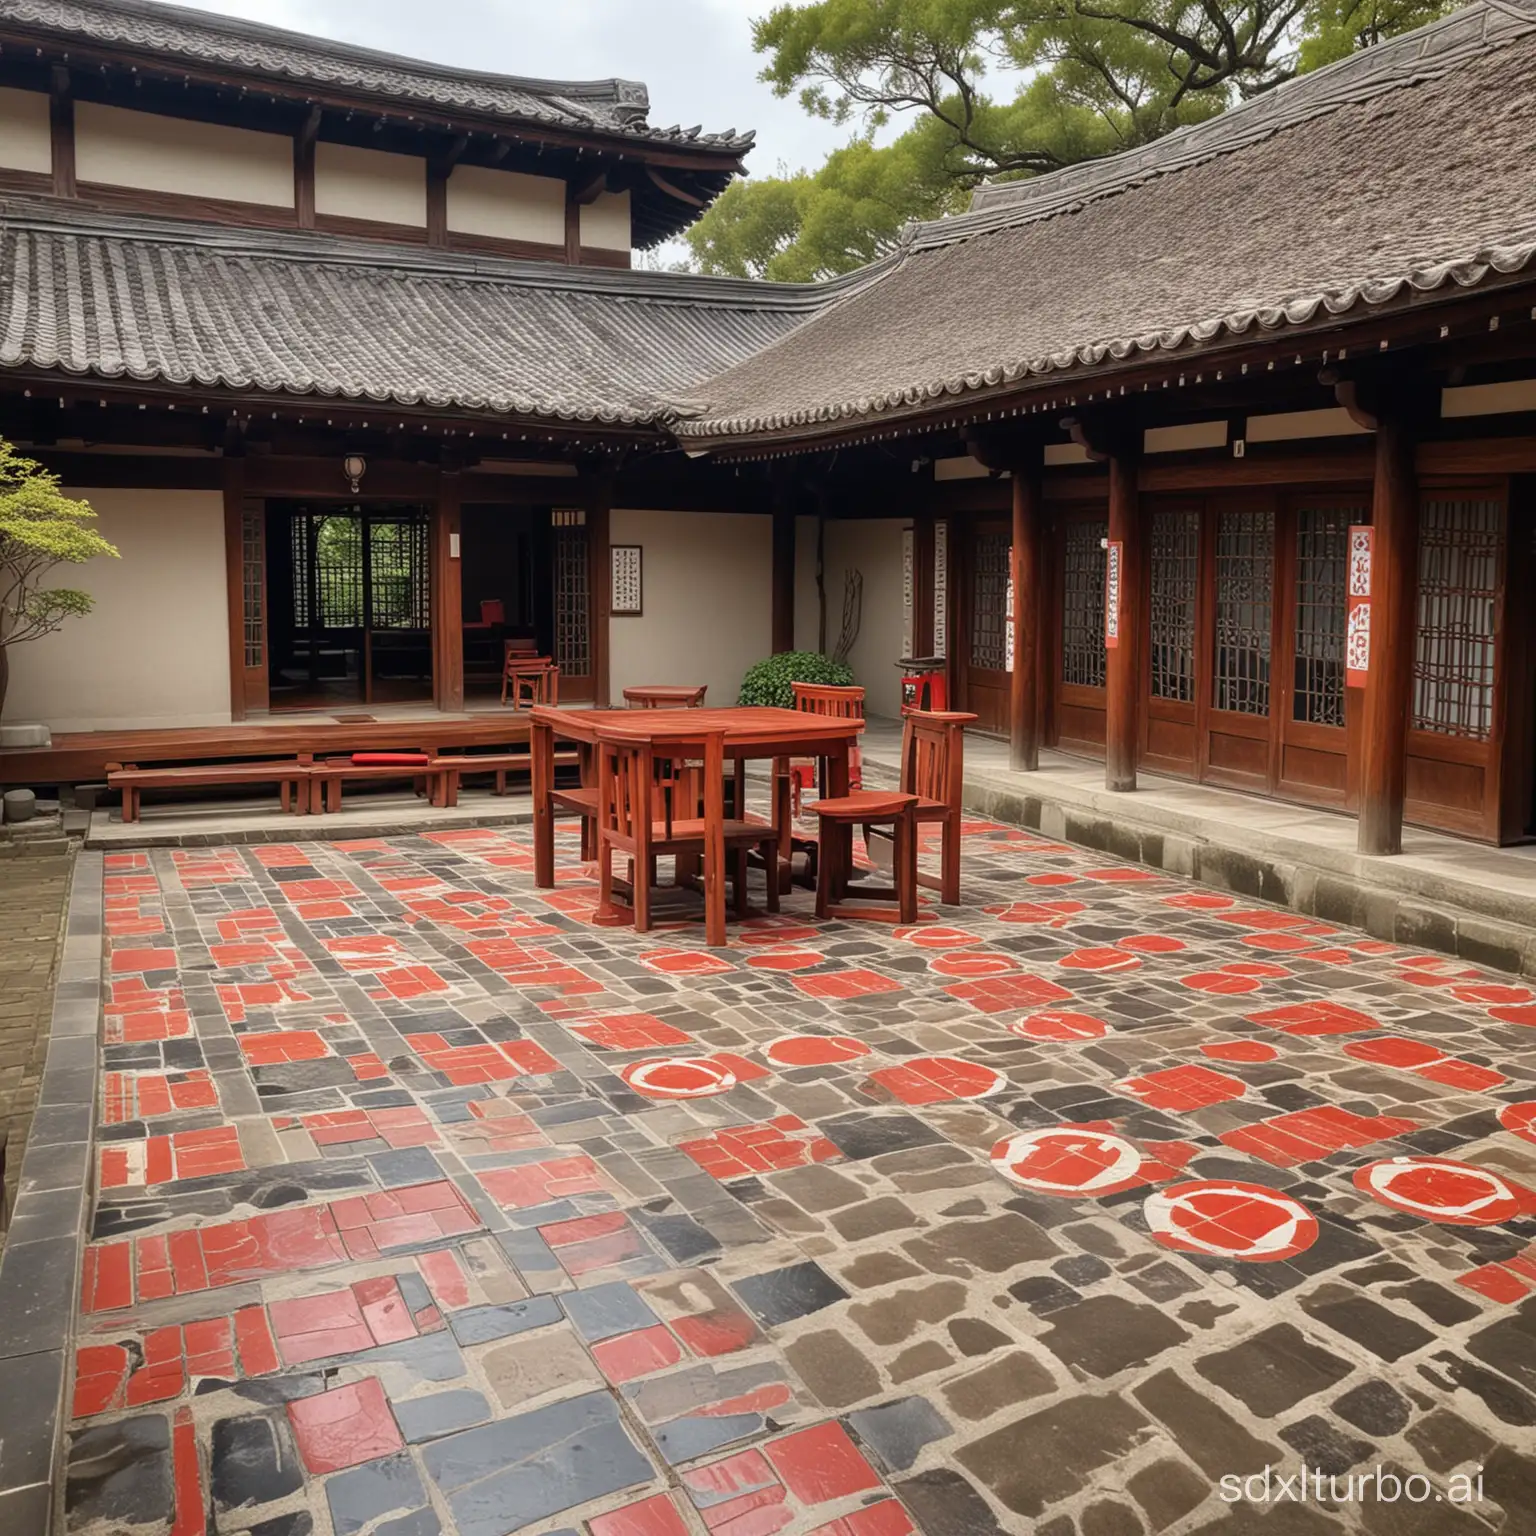 Lively-Japanese-Temple-Courtyard-with-Retro-Tiles-and-Red-Round-Tables